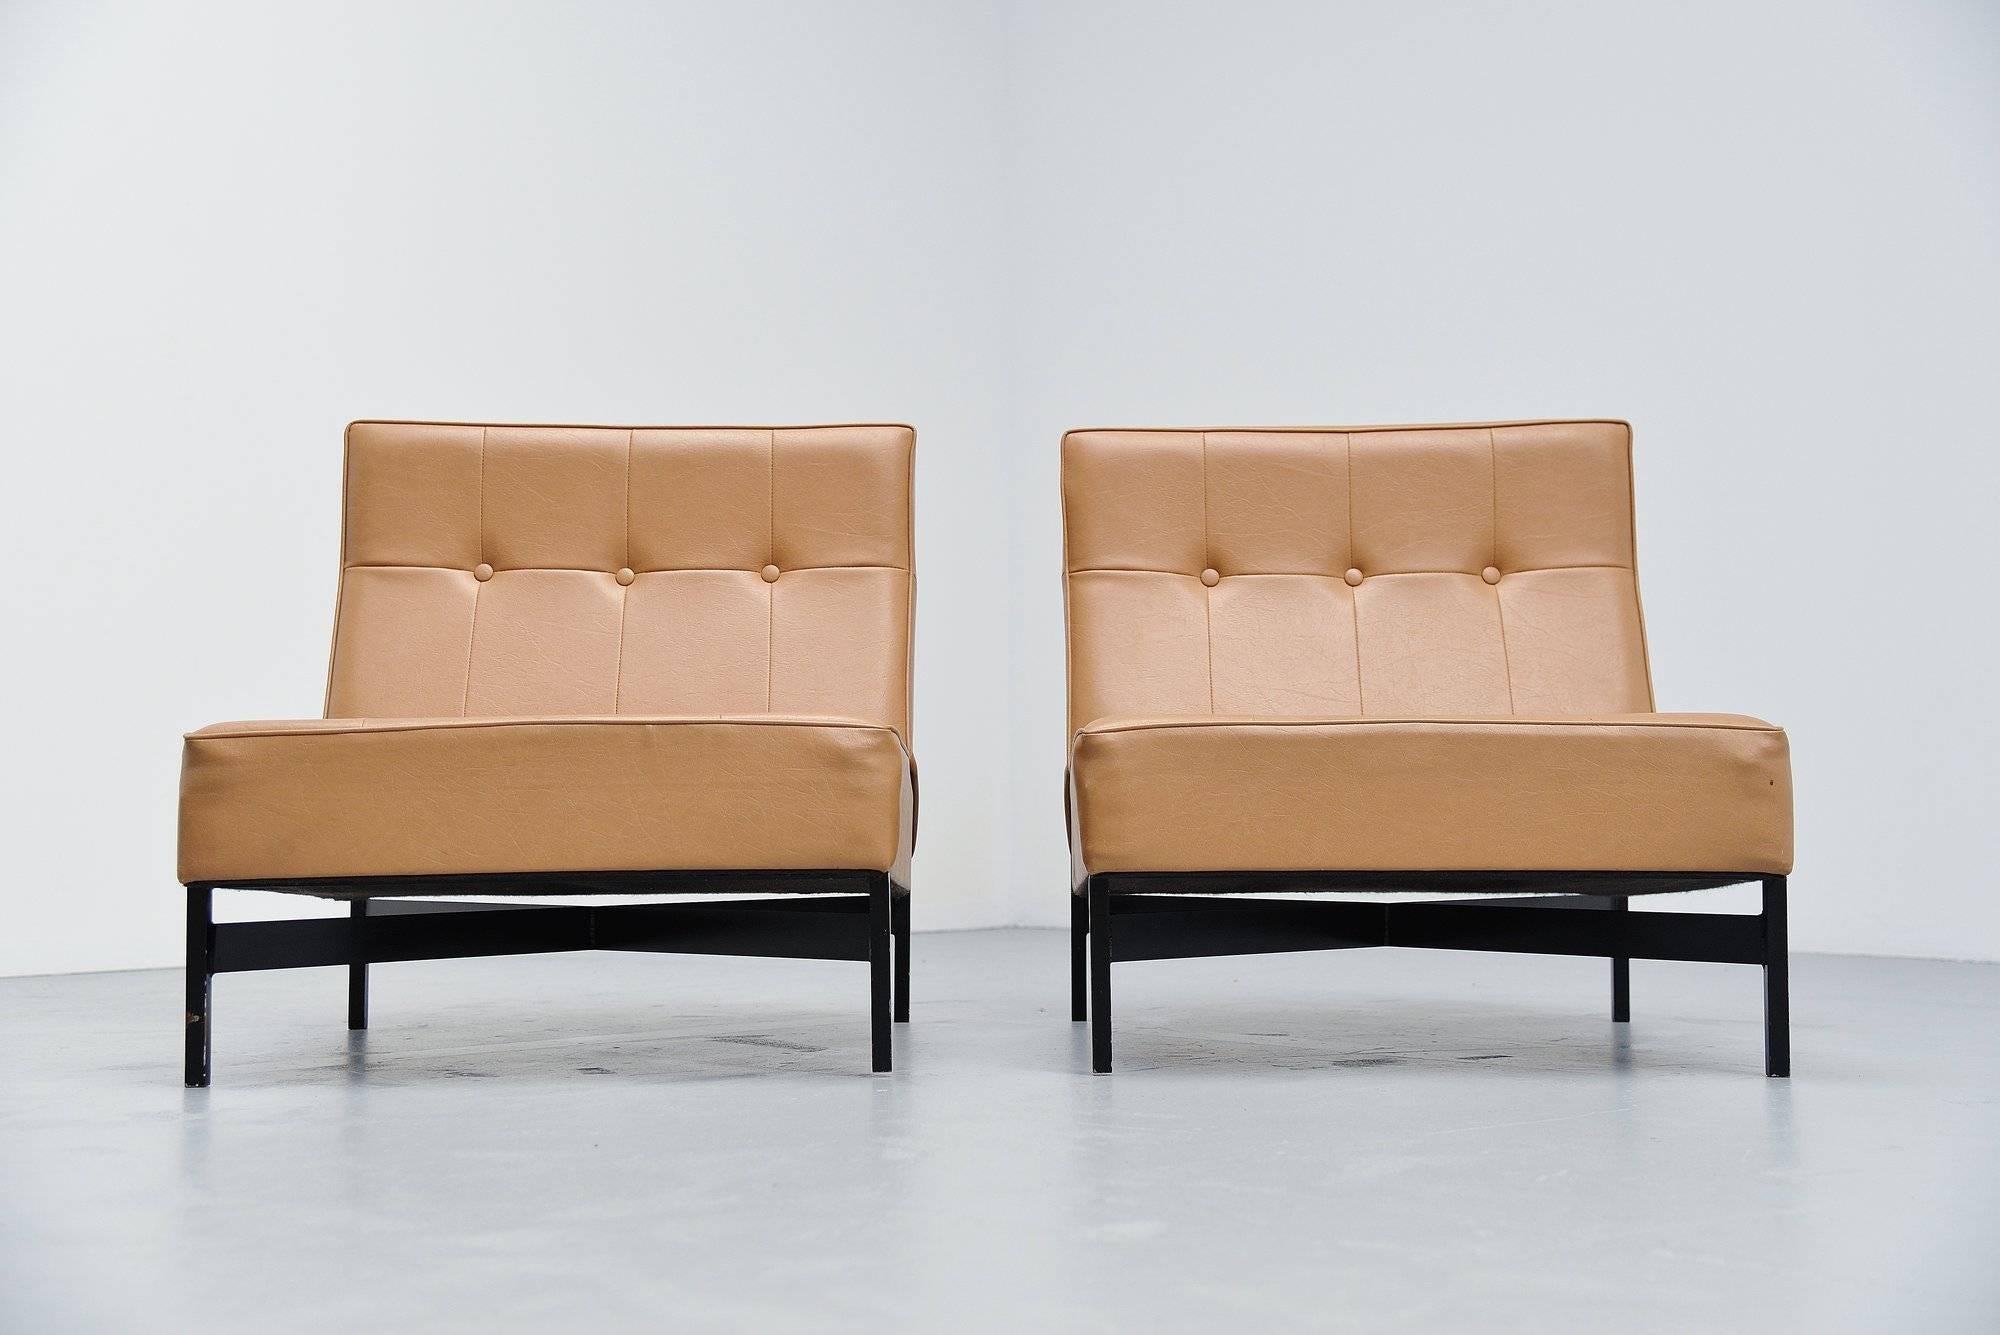 Rare unique pair of chairs designed by architect Wim den Boon, Holland, circa 1965. These super chairs were inspired by the modular sofa by Nelson and the chairs by Florence Knoll in the days. They are made of a black square tubular frame and camel